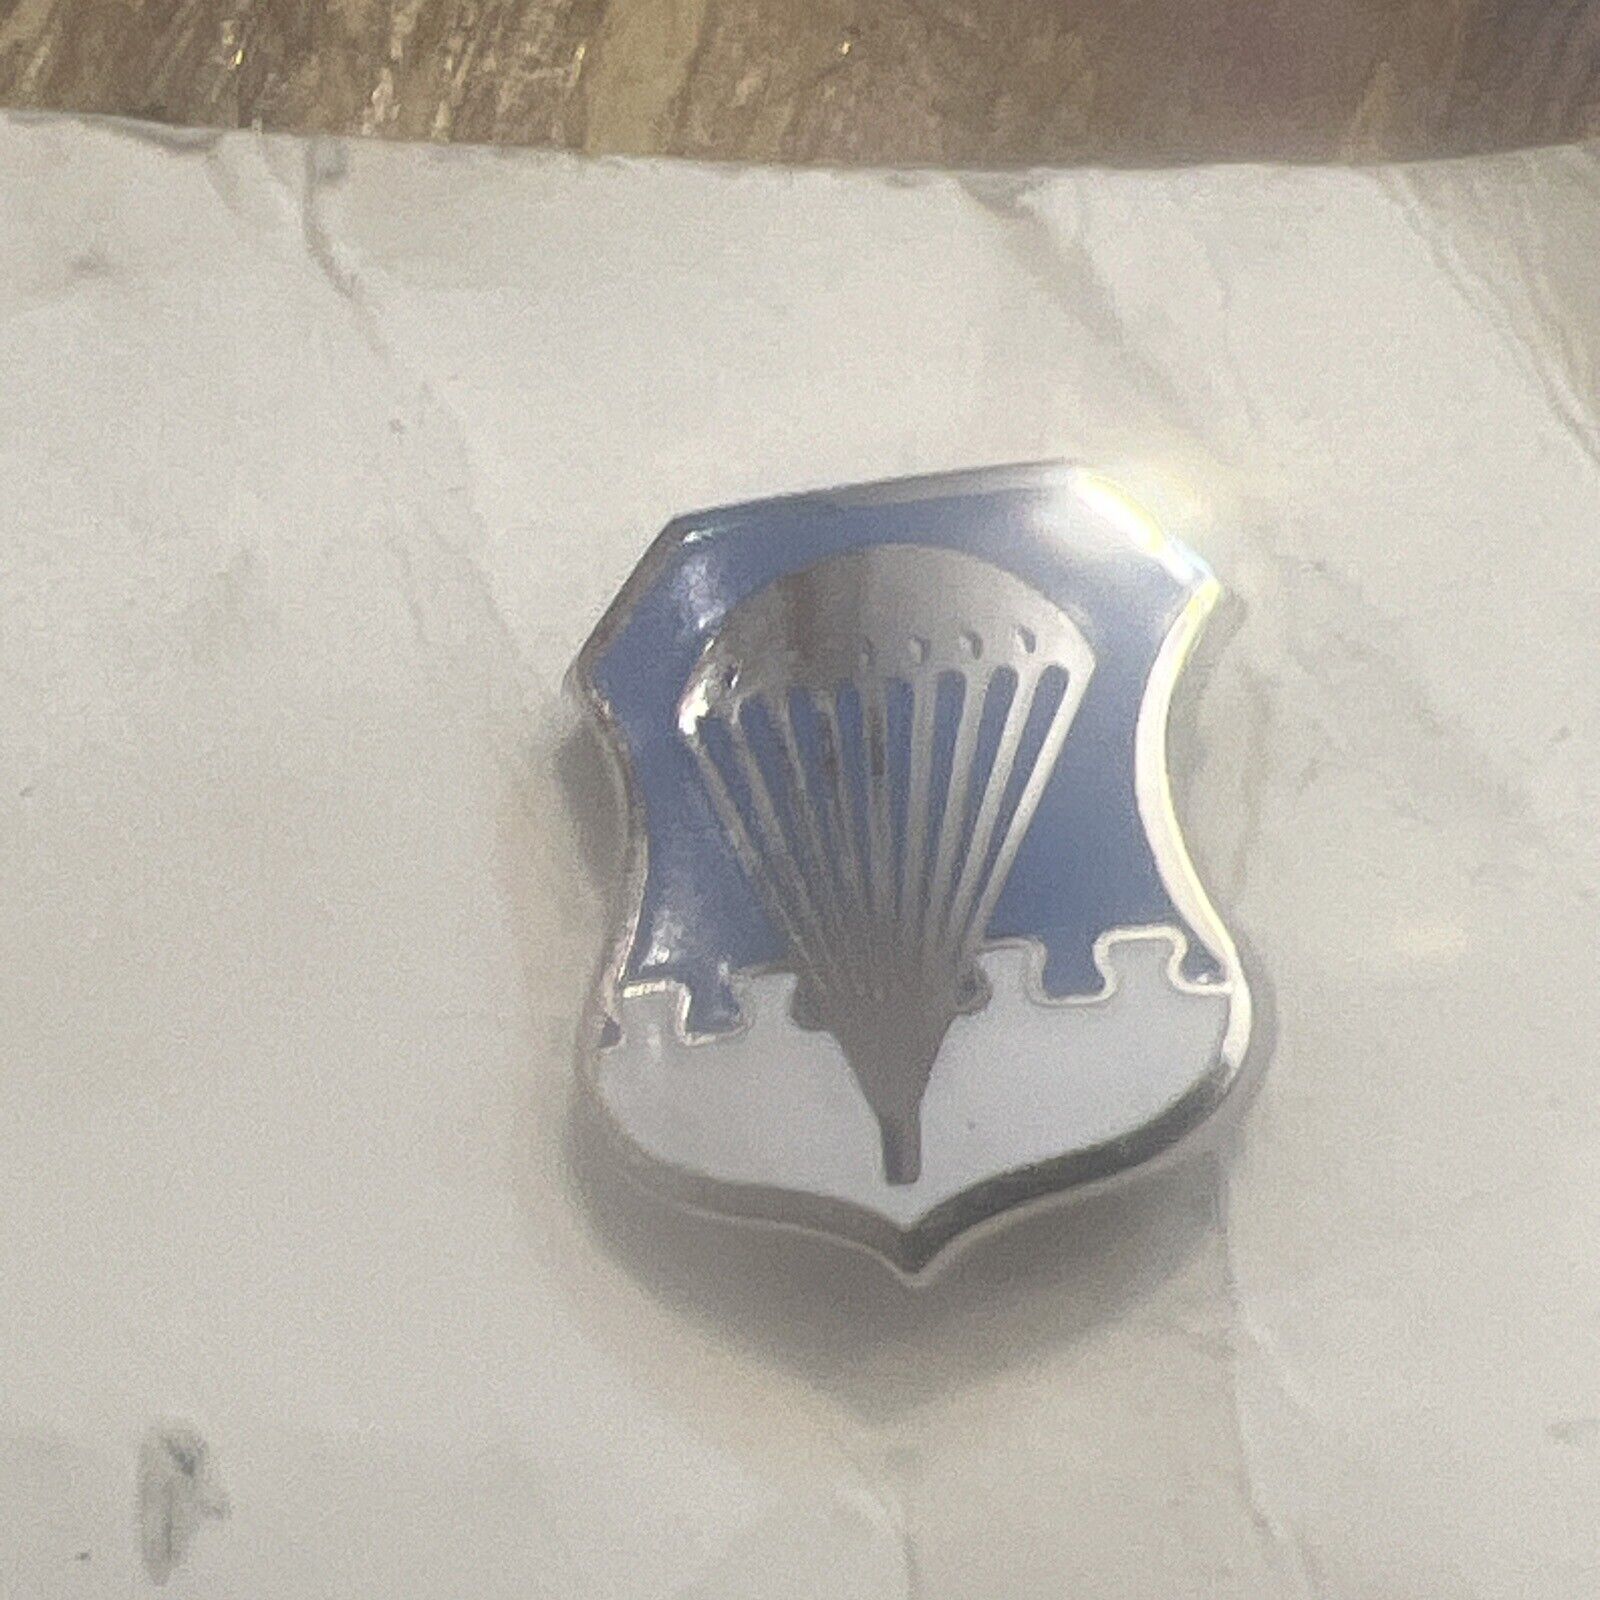 USAF Air Force 1956-1963 Paratroop Qualification Badge Insignia Pin